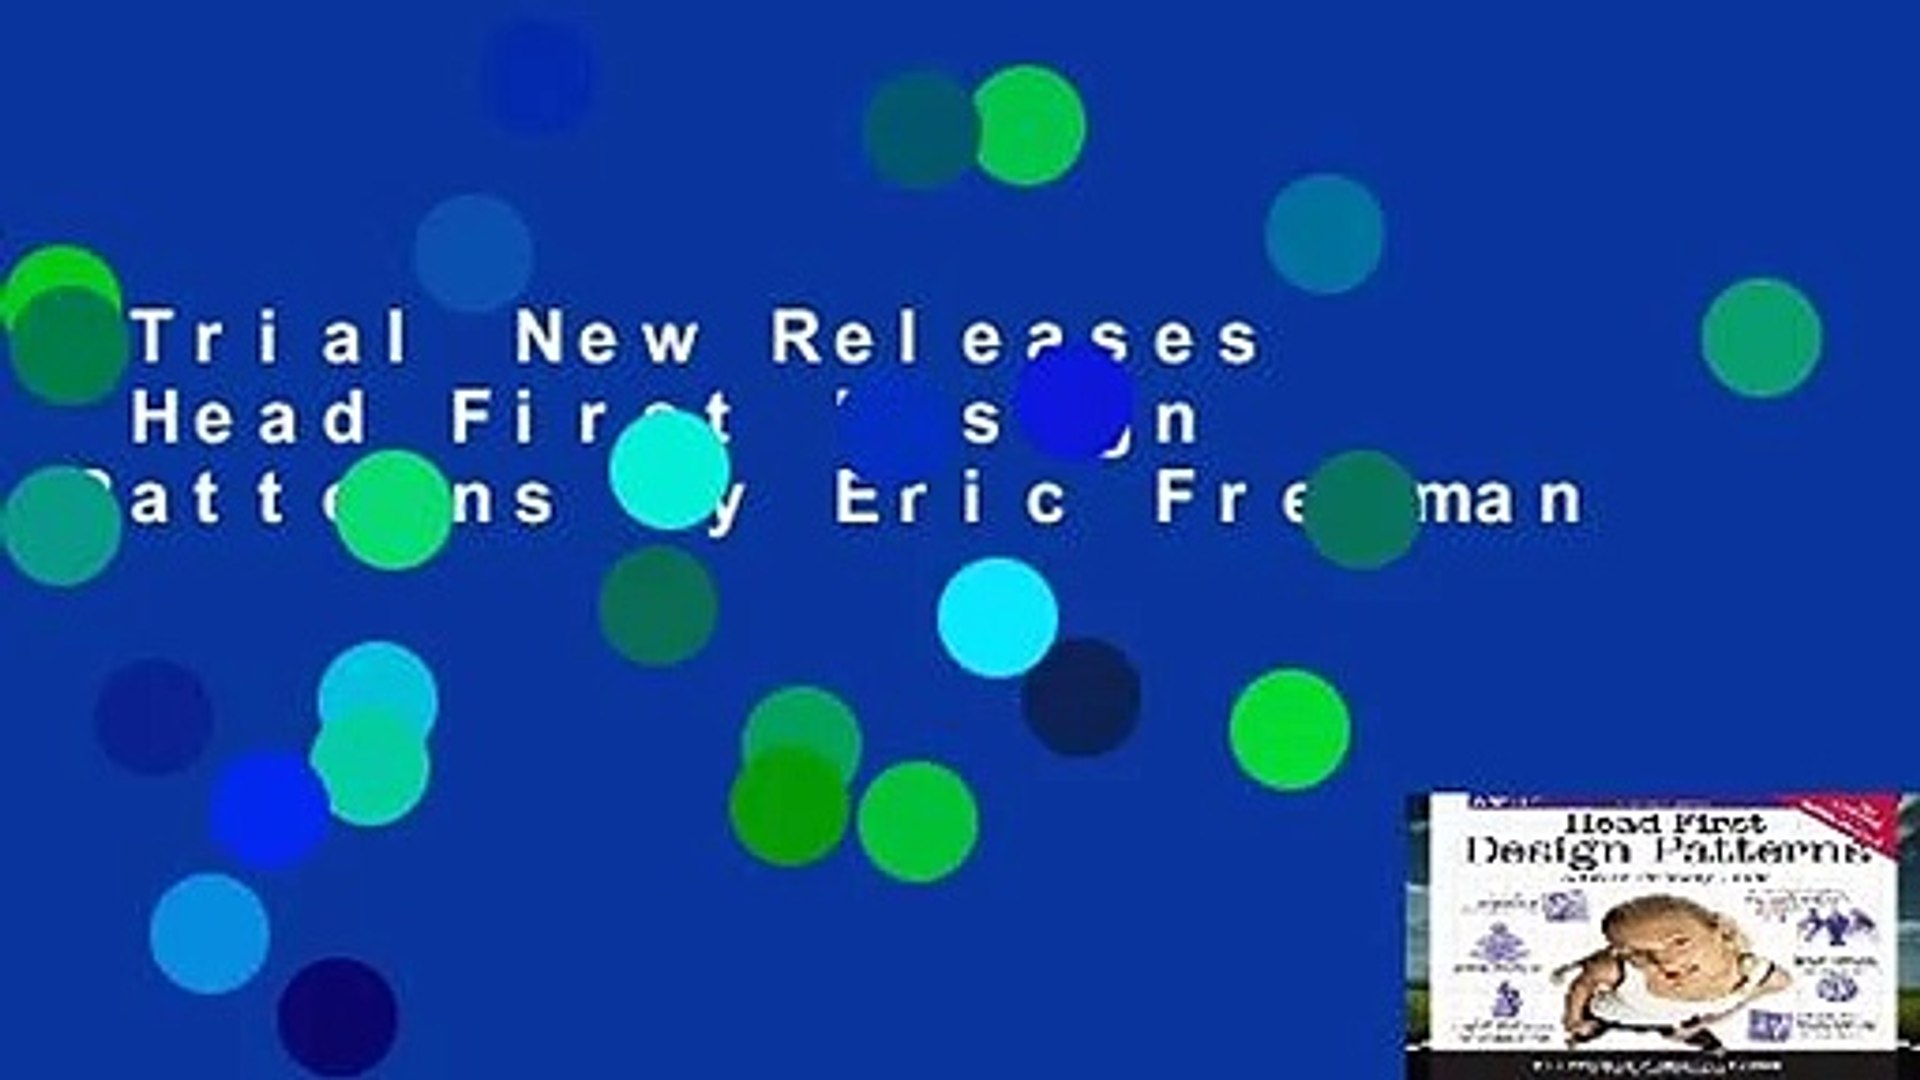 Trial New Releases  Head First Design Patterns by Eric Freeman